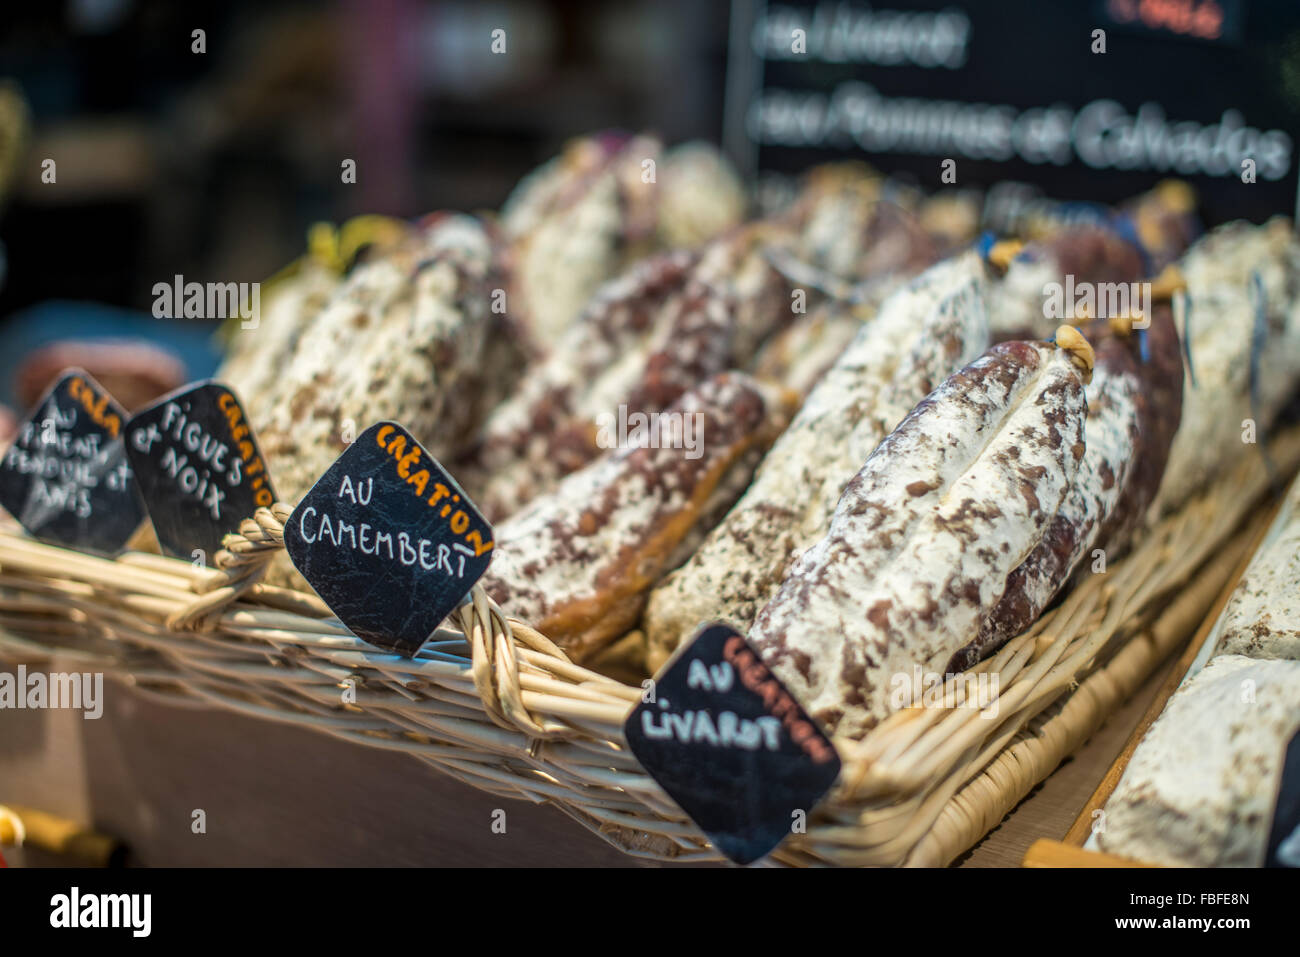 Close-Up Of Sausages On Display At Store Stock Photo